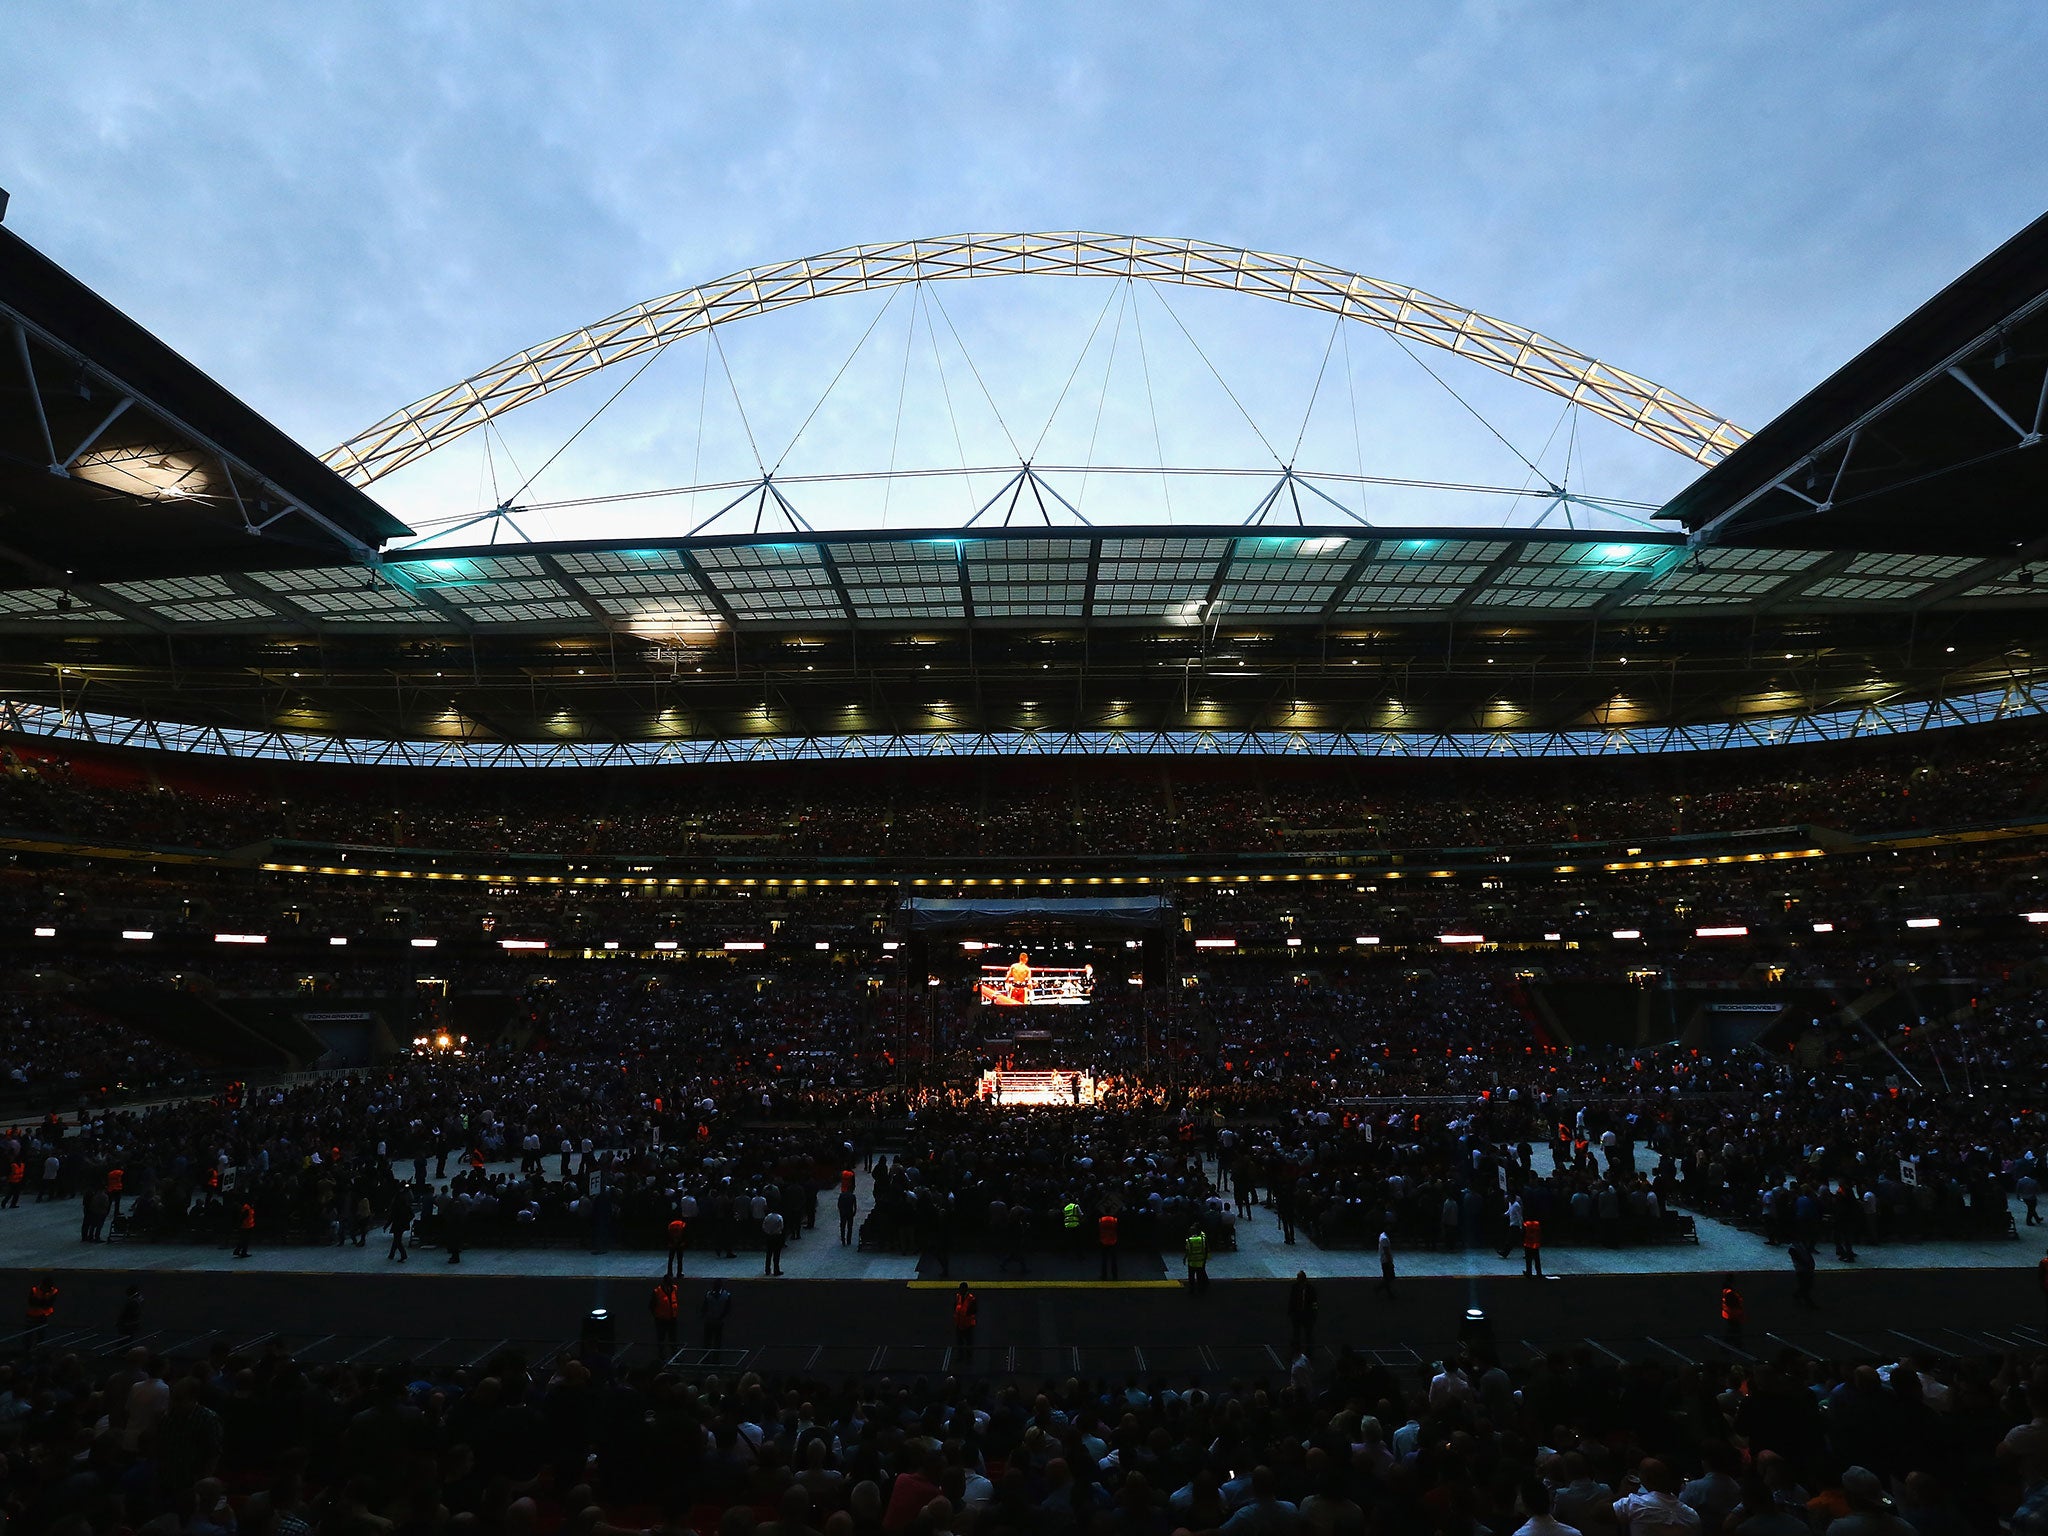 A view of Wembley when it last staged boxing